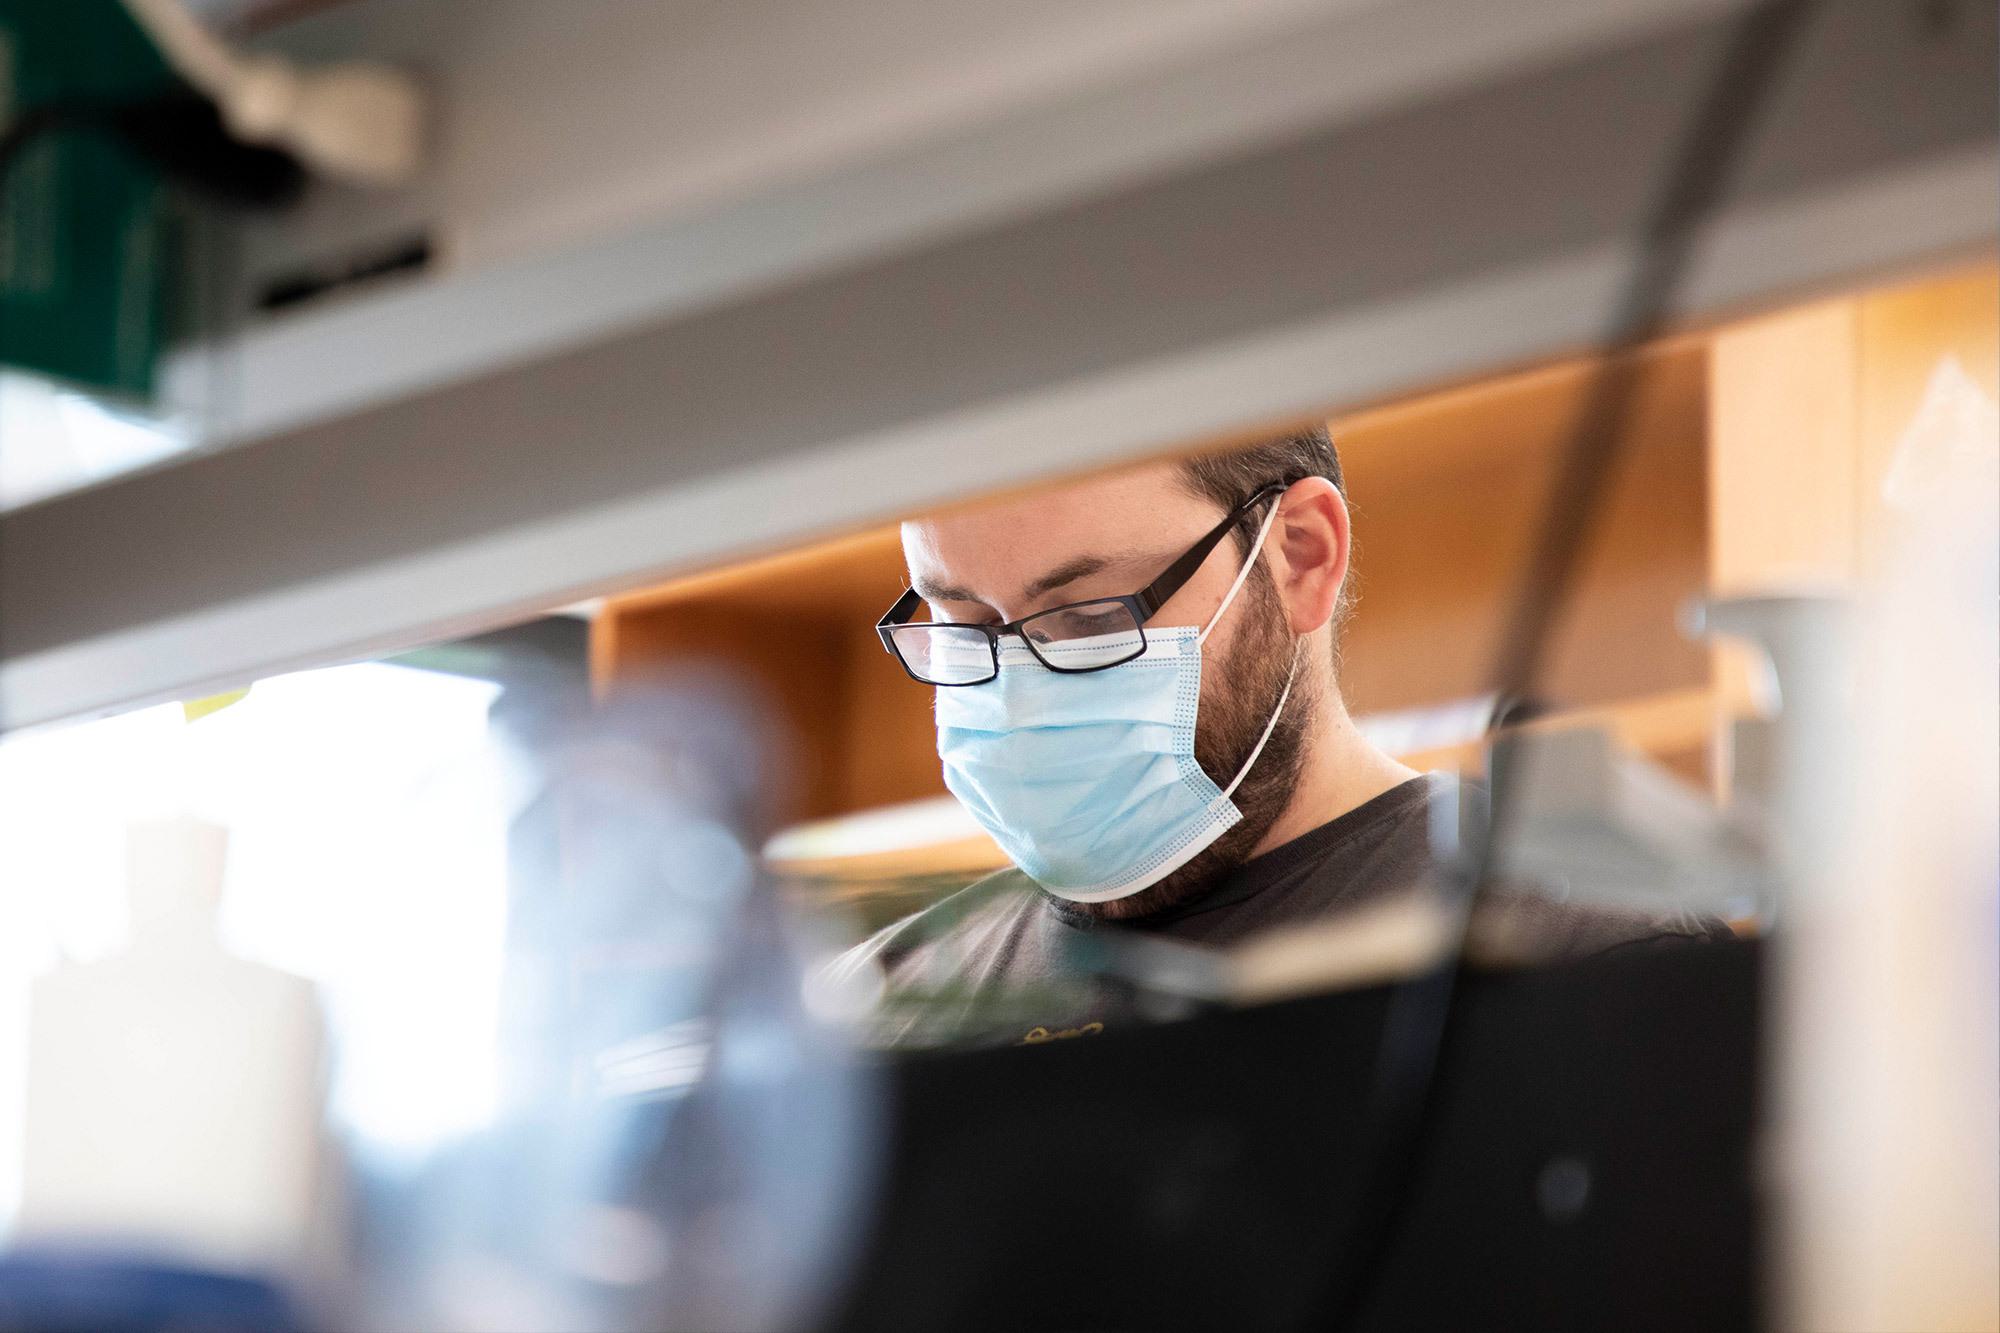 scientist with beard, glasses and face mask